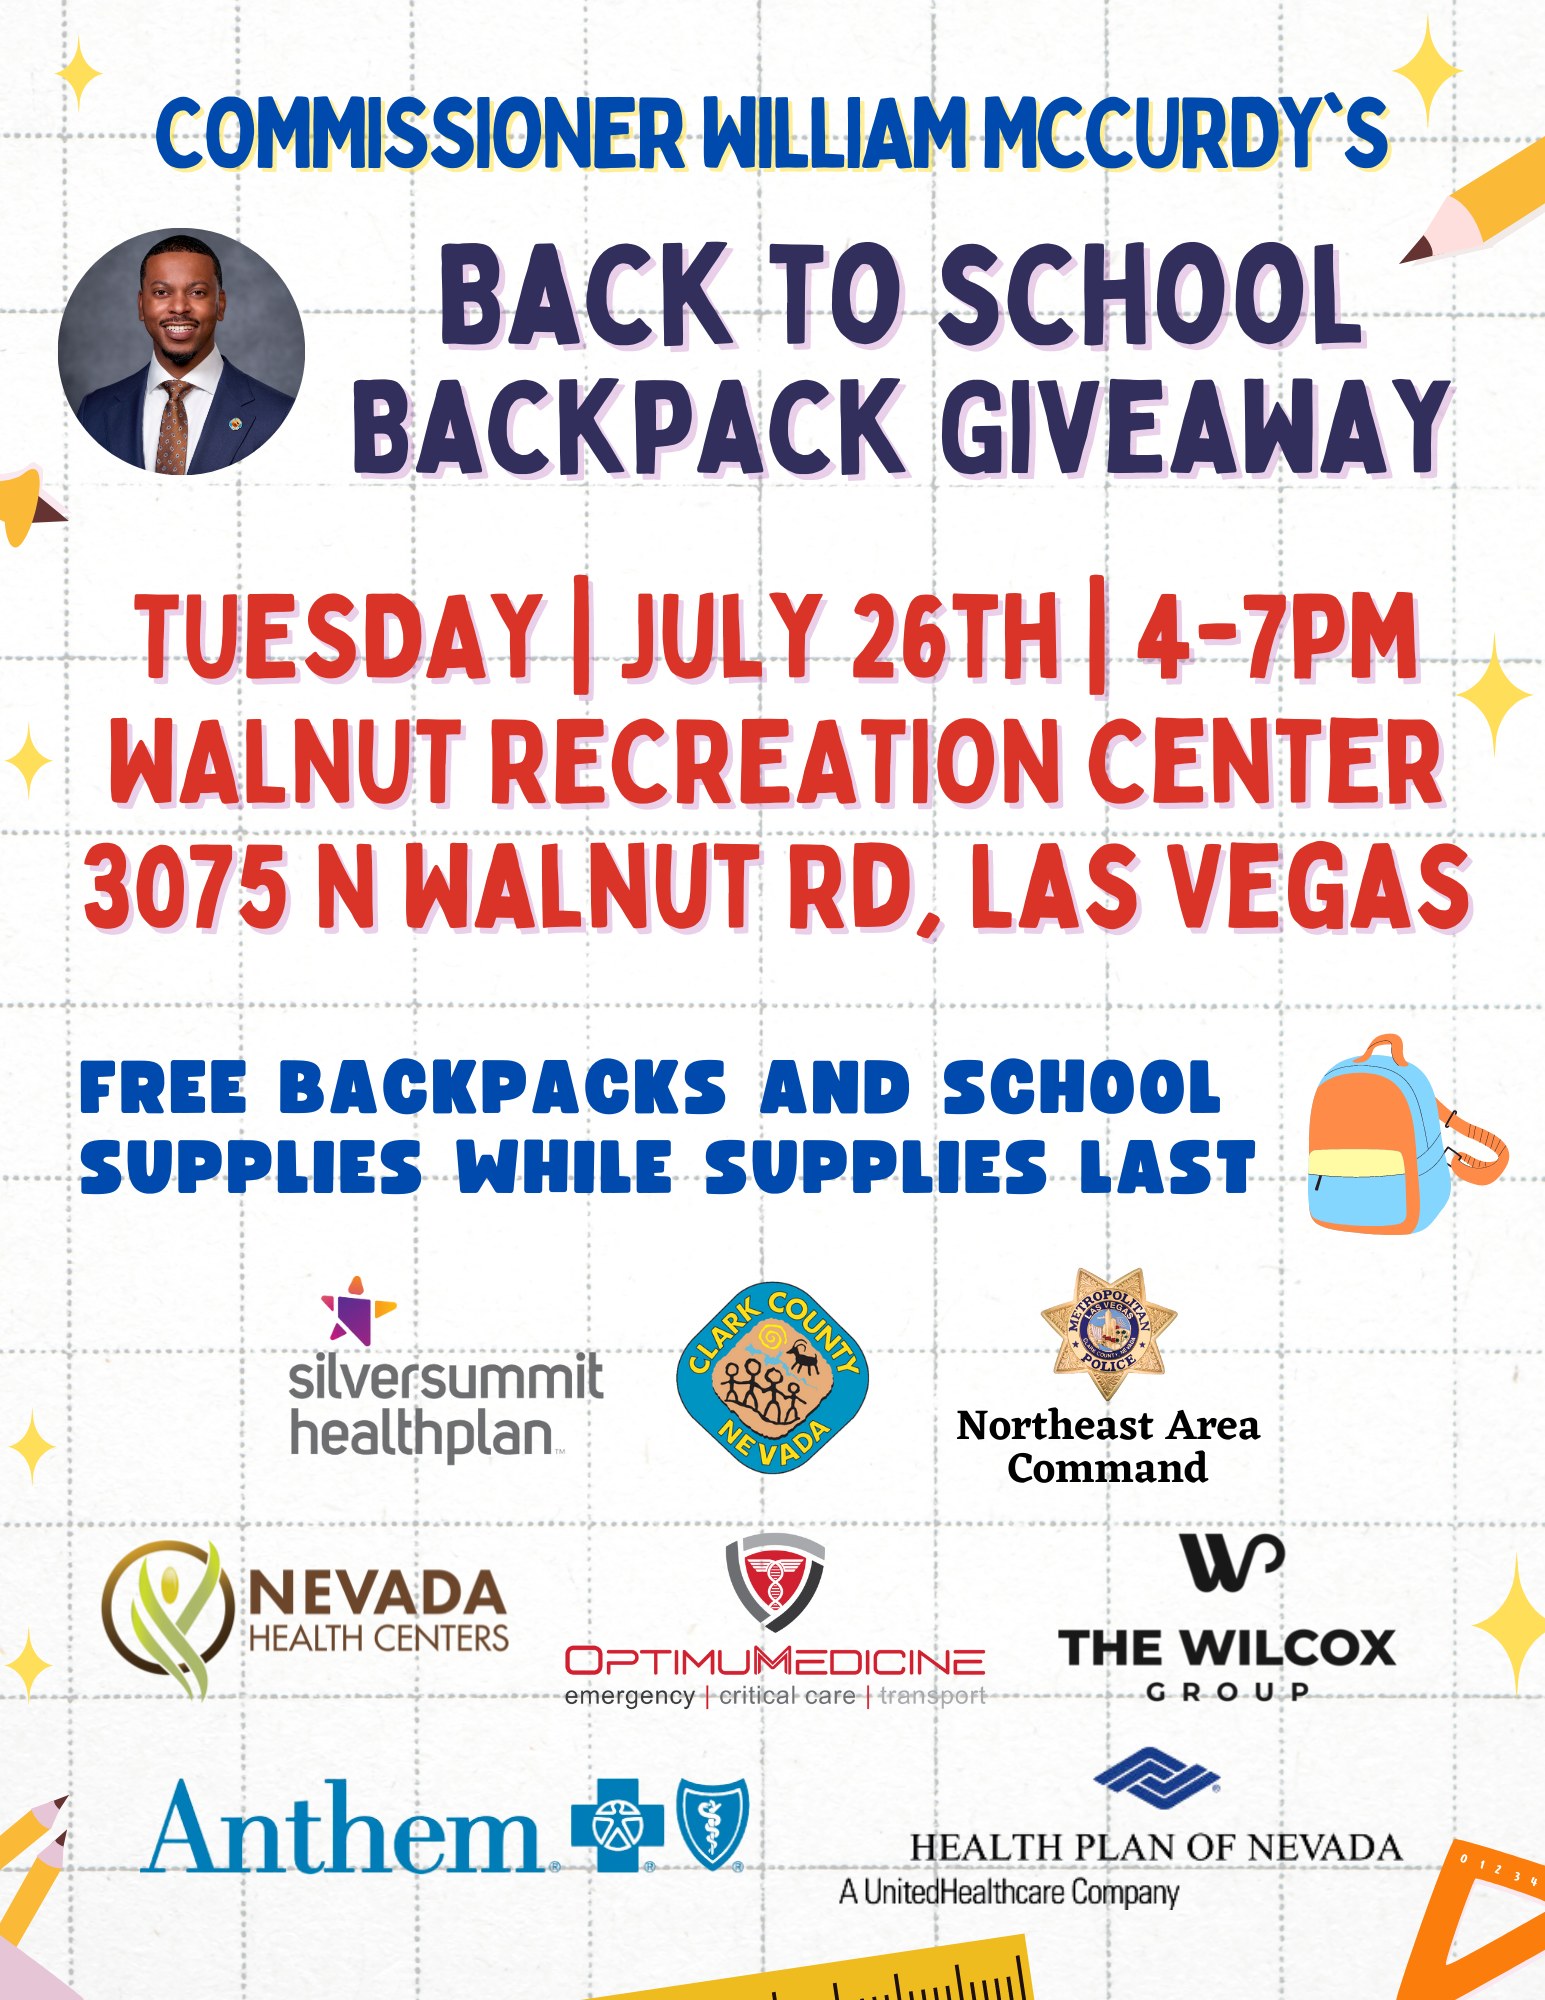 Las Vegas Premium Outlets to host back-to-school specials